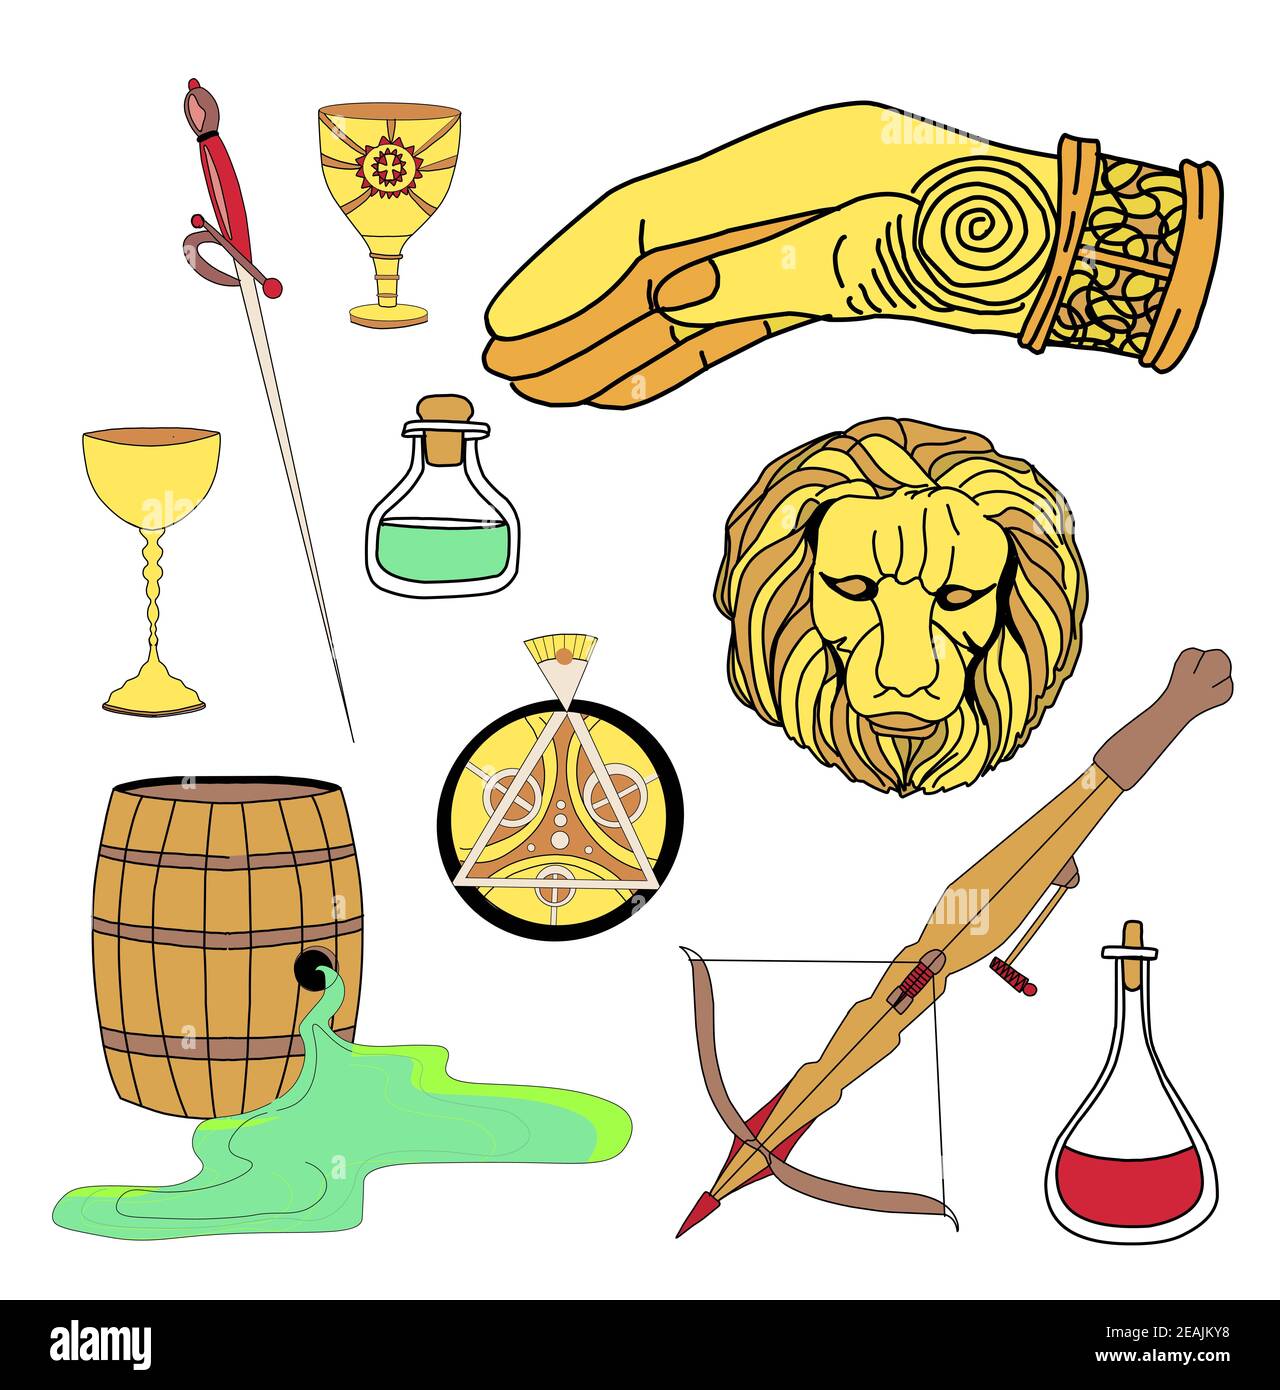 Magic stickers. Wild fire, crossbow, old scroll. The head of a golden lion and the sign of the right hand. Great house symbols collection. Stock Photo